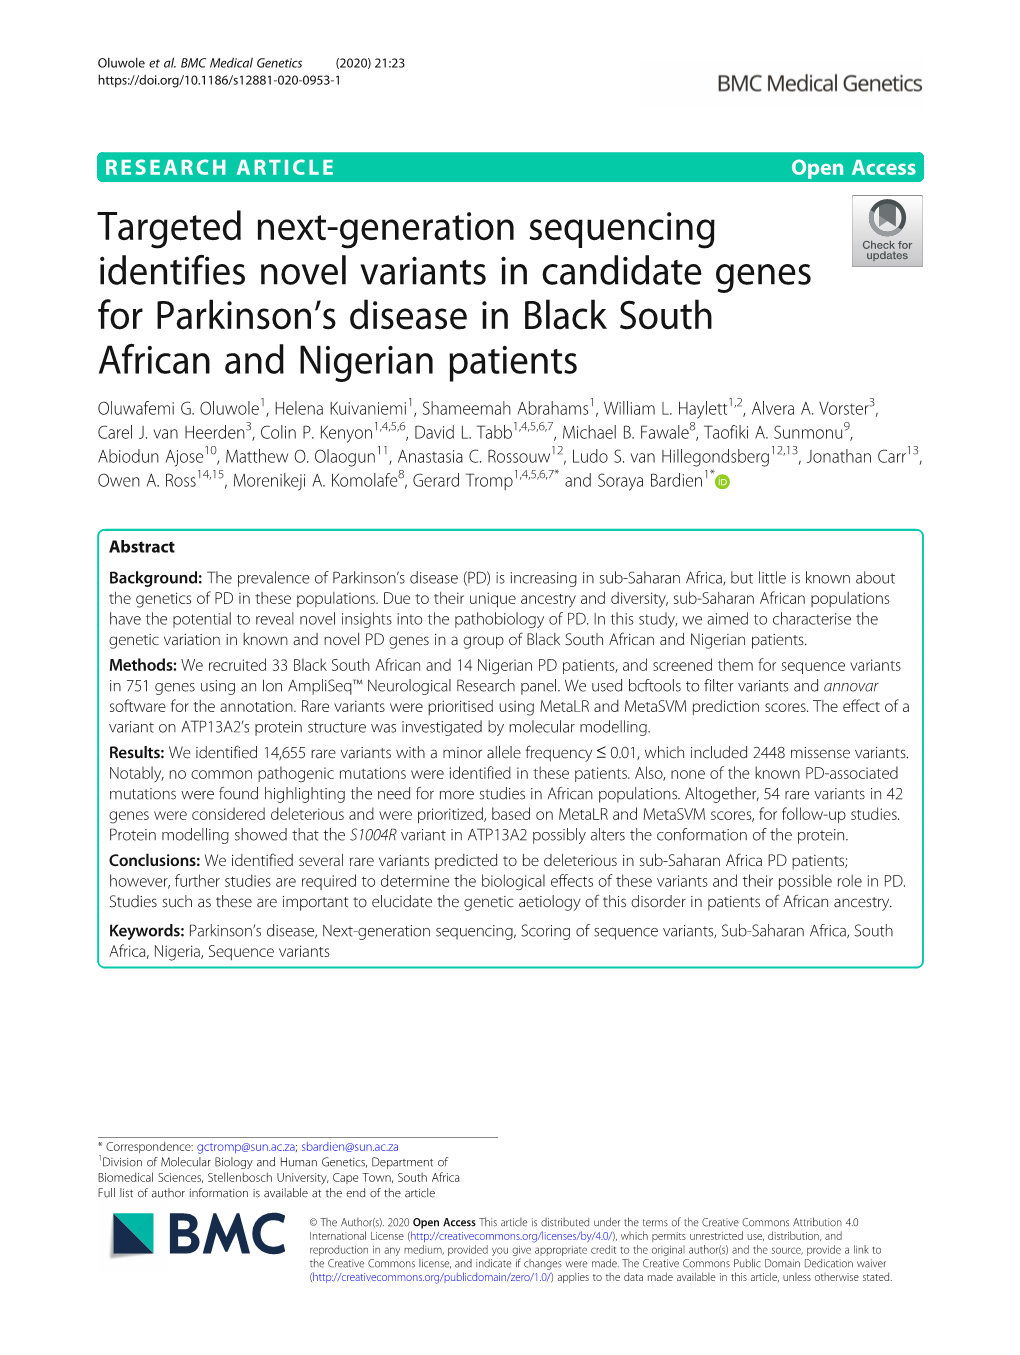 Targeted Next-Generation Sequencing Identifies Novel Variants in Candidate Genes for Parkinson’S Disease in Black South African and Nigerian Patients Oluwafemi G